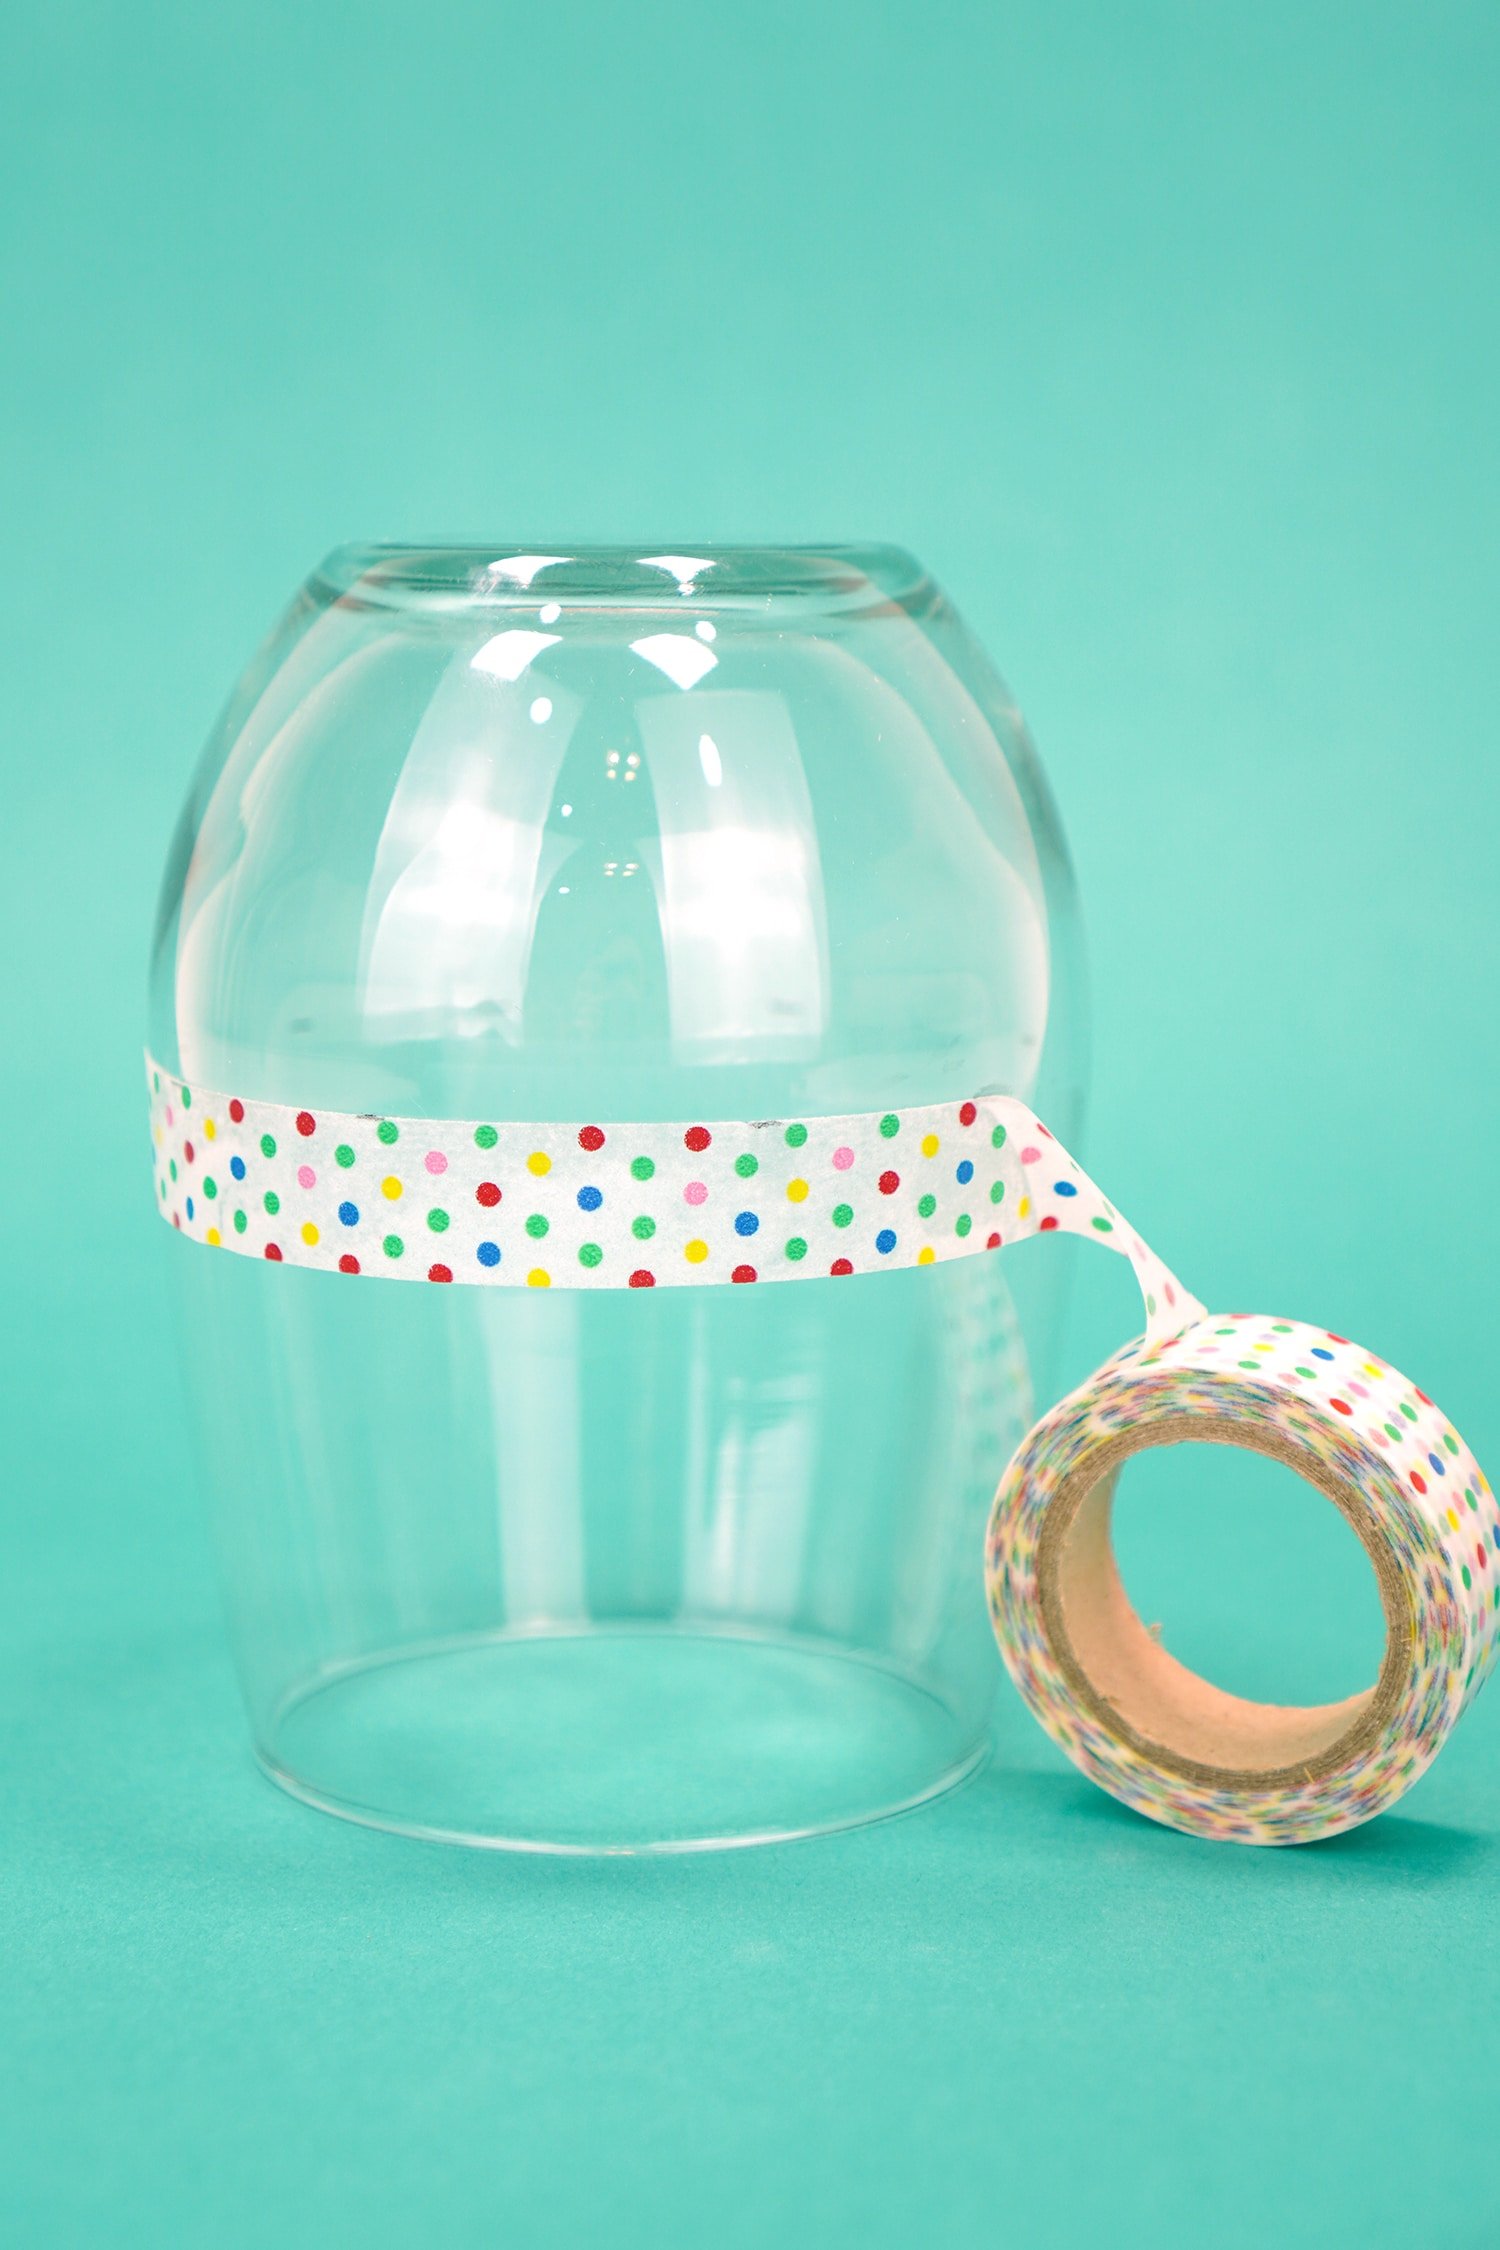 Upside down stemless wine glass on teal background with a ring of polka dot washi tape around glass